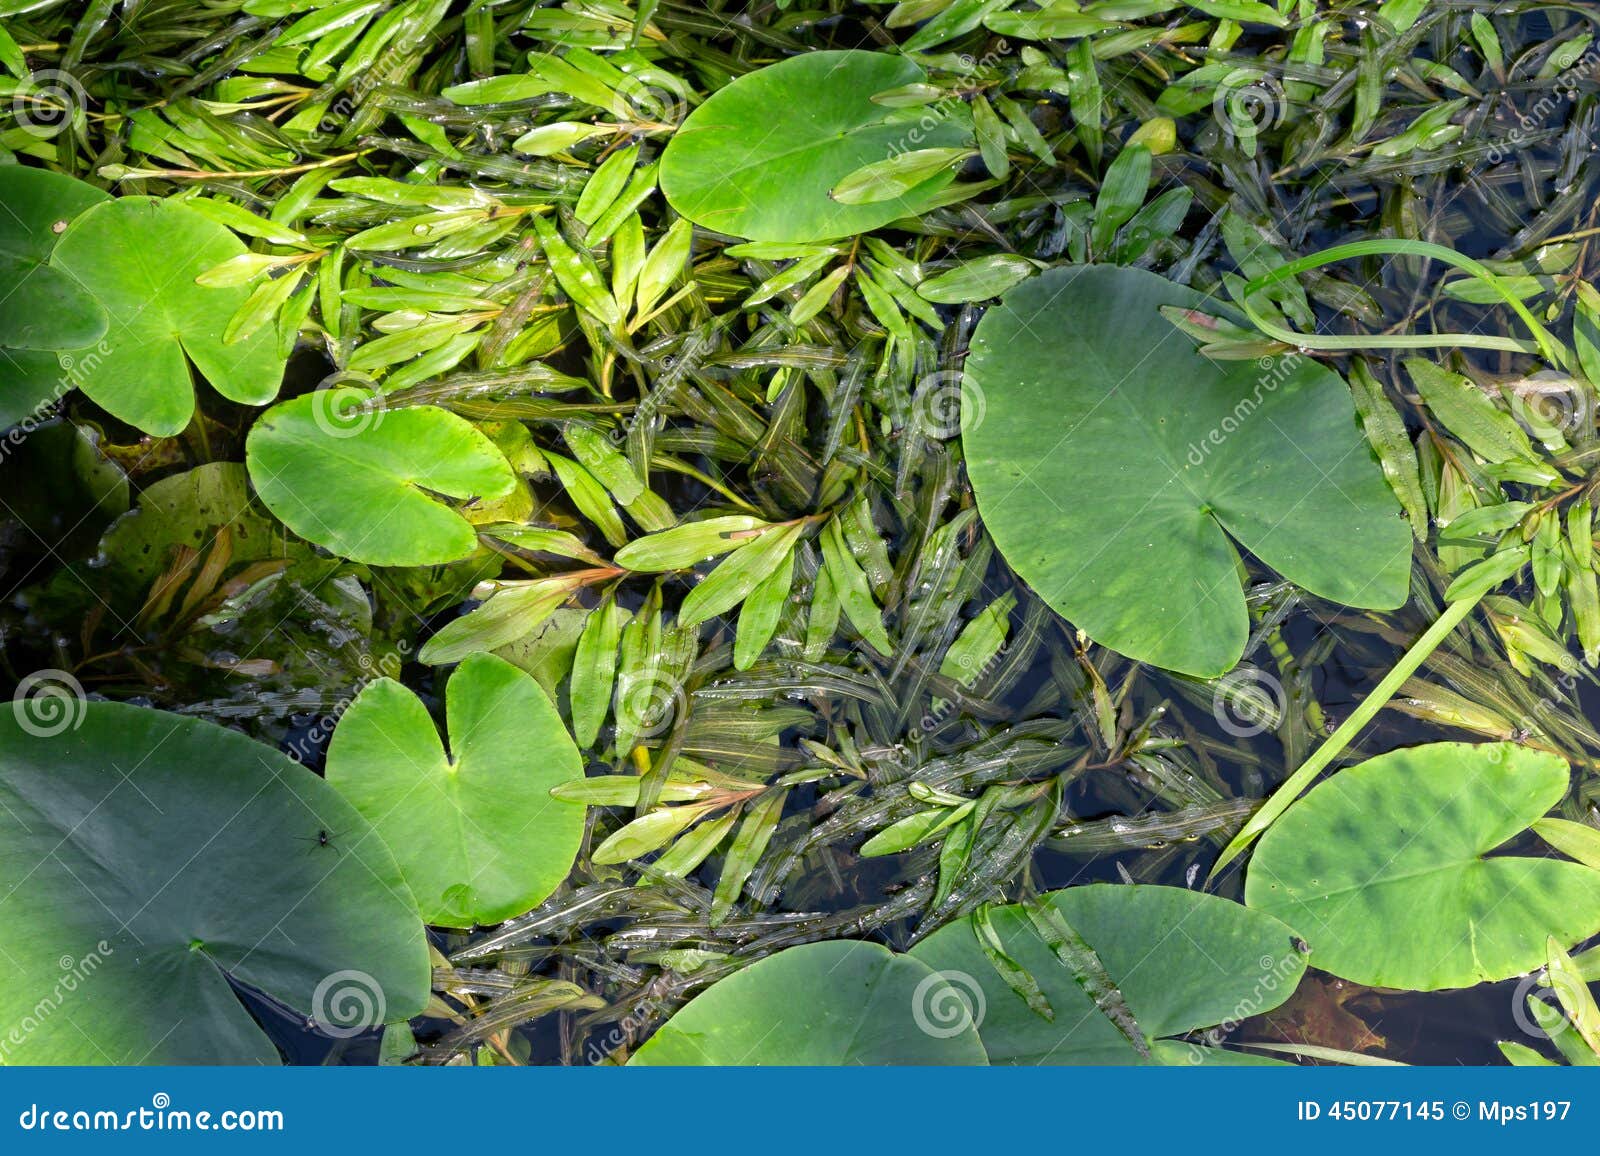 Aquatic Plant Leaves Floating on Water Surface Stock Image - Image of ...